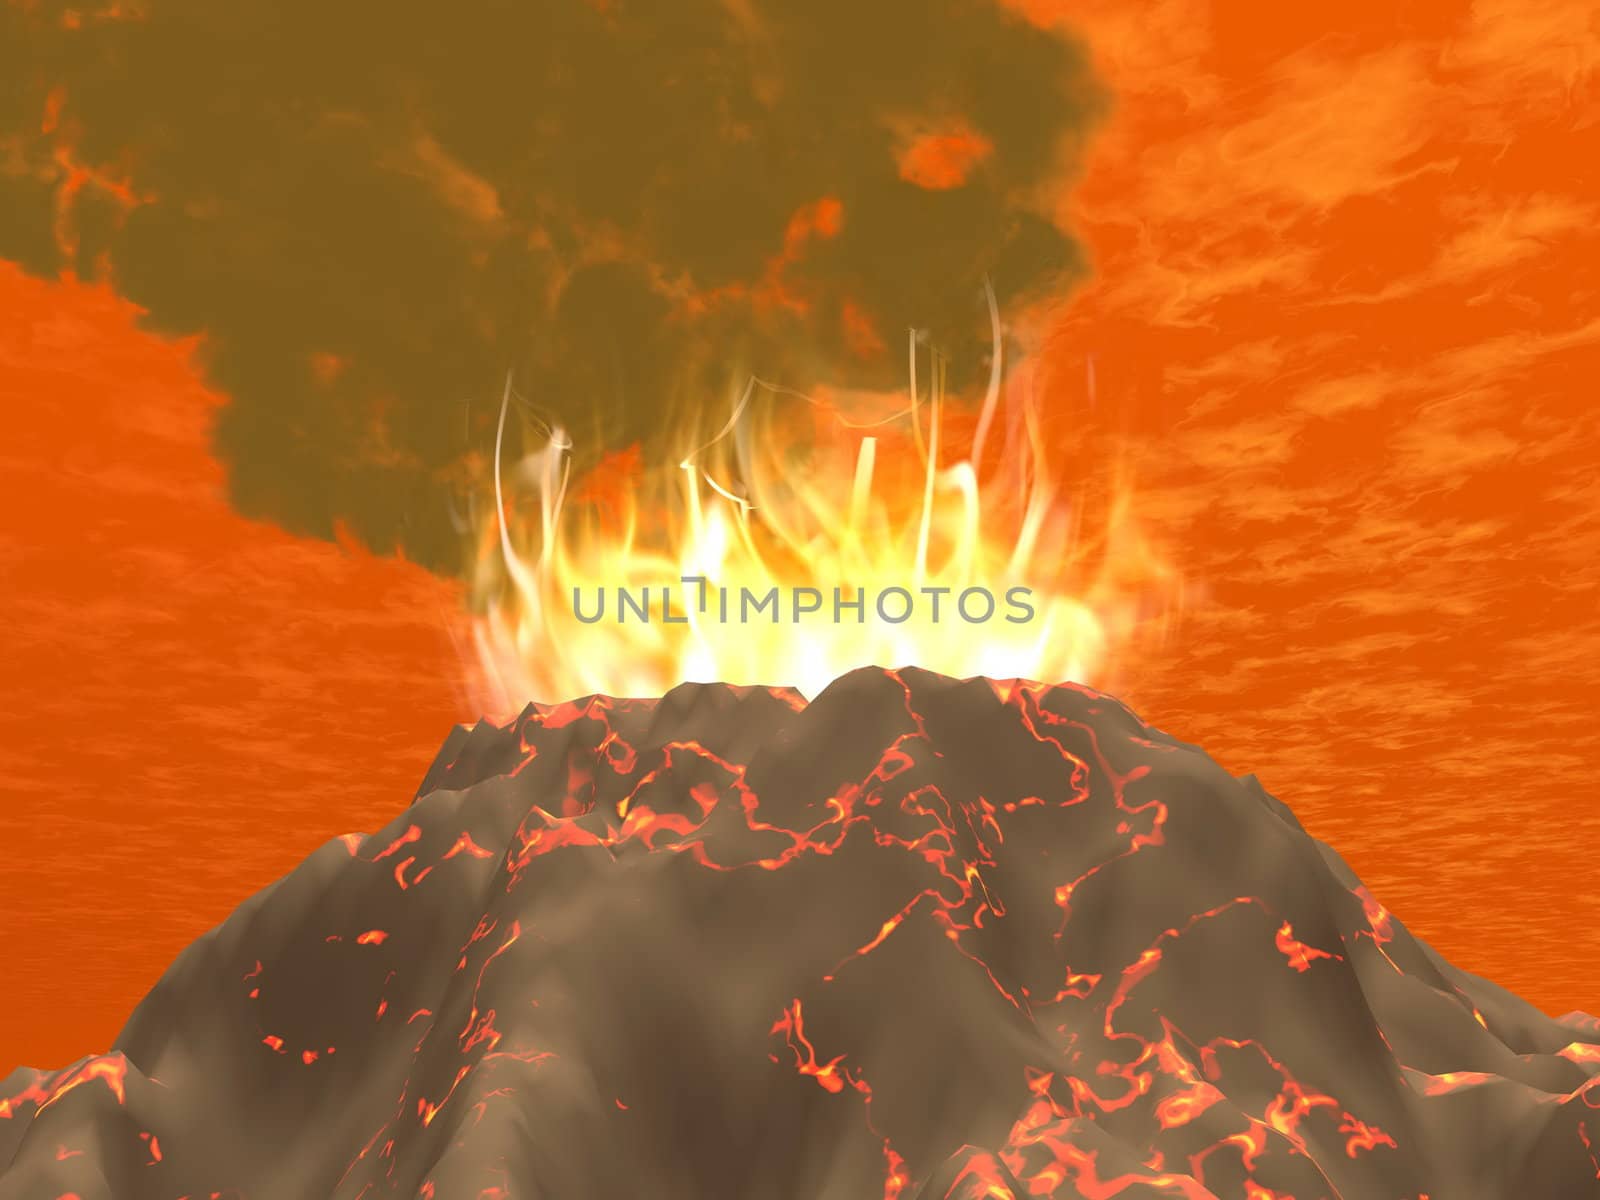 Eruption of a volcano with fire and big smoke in red byckground